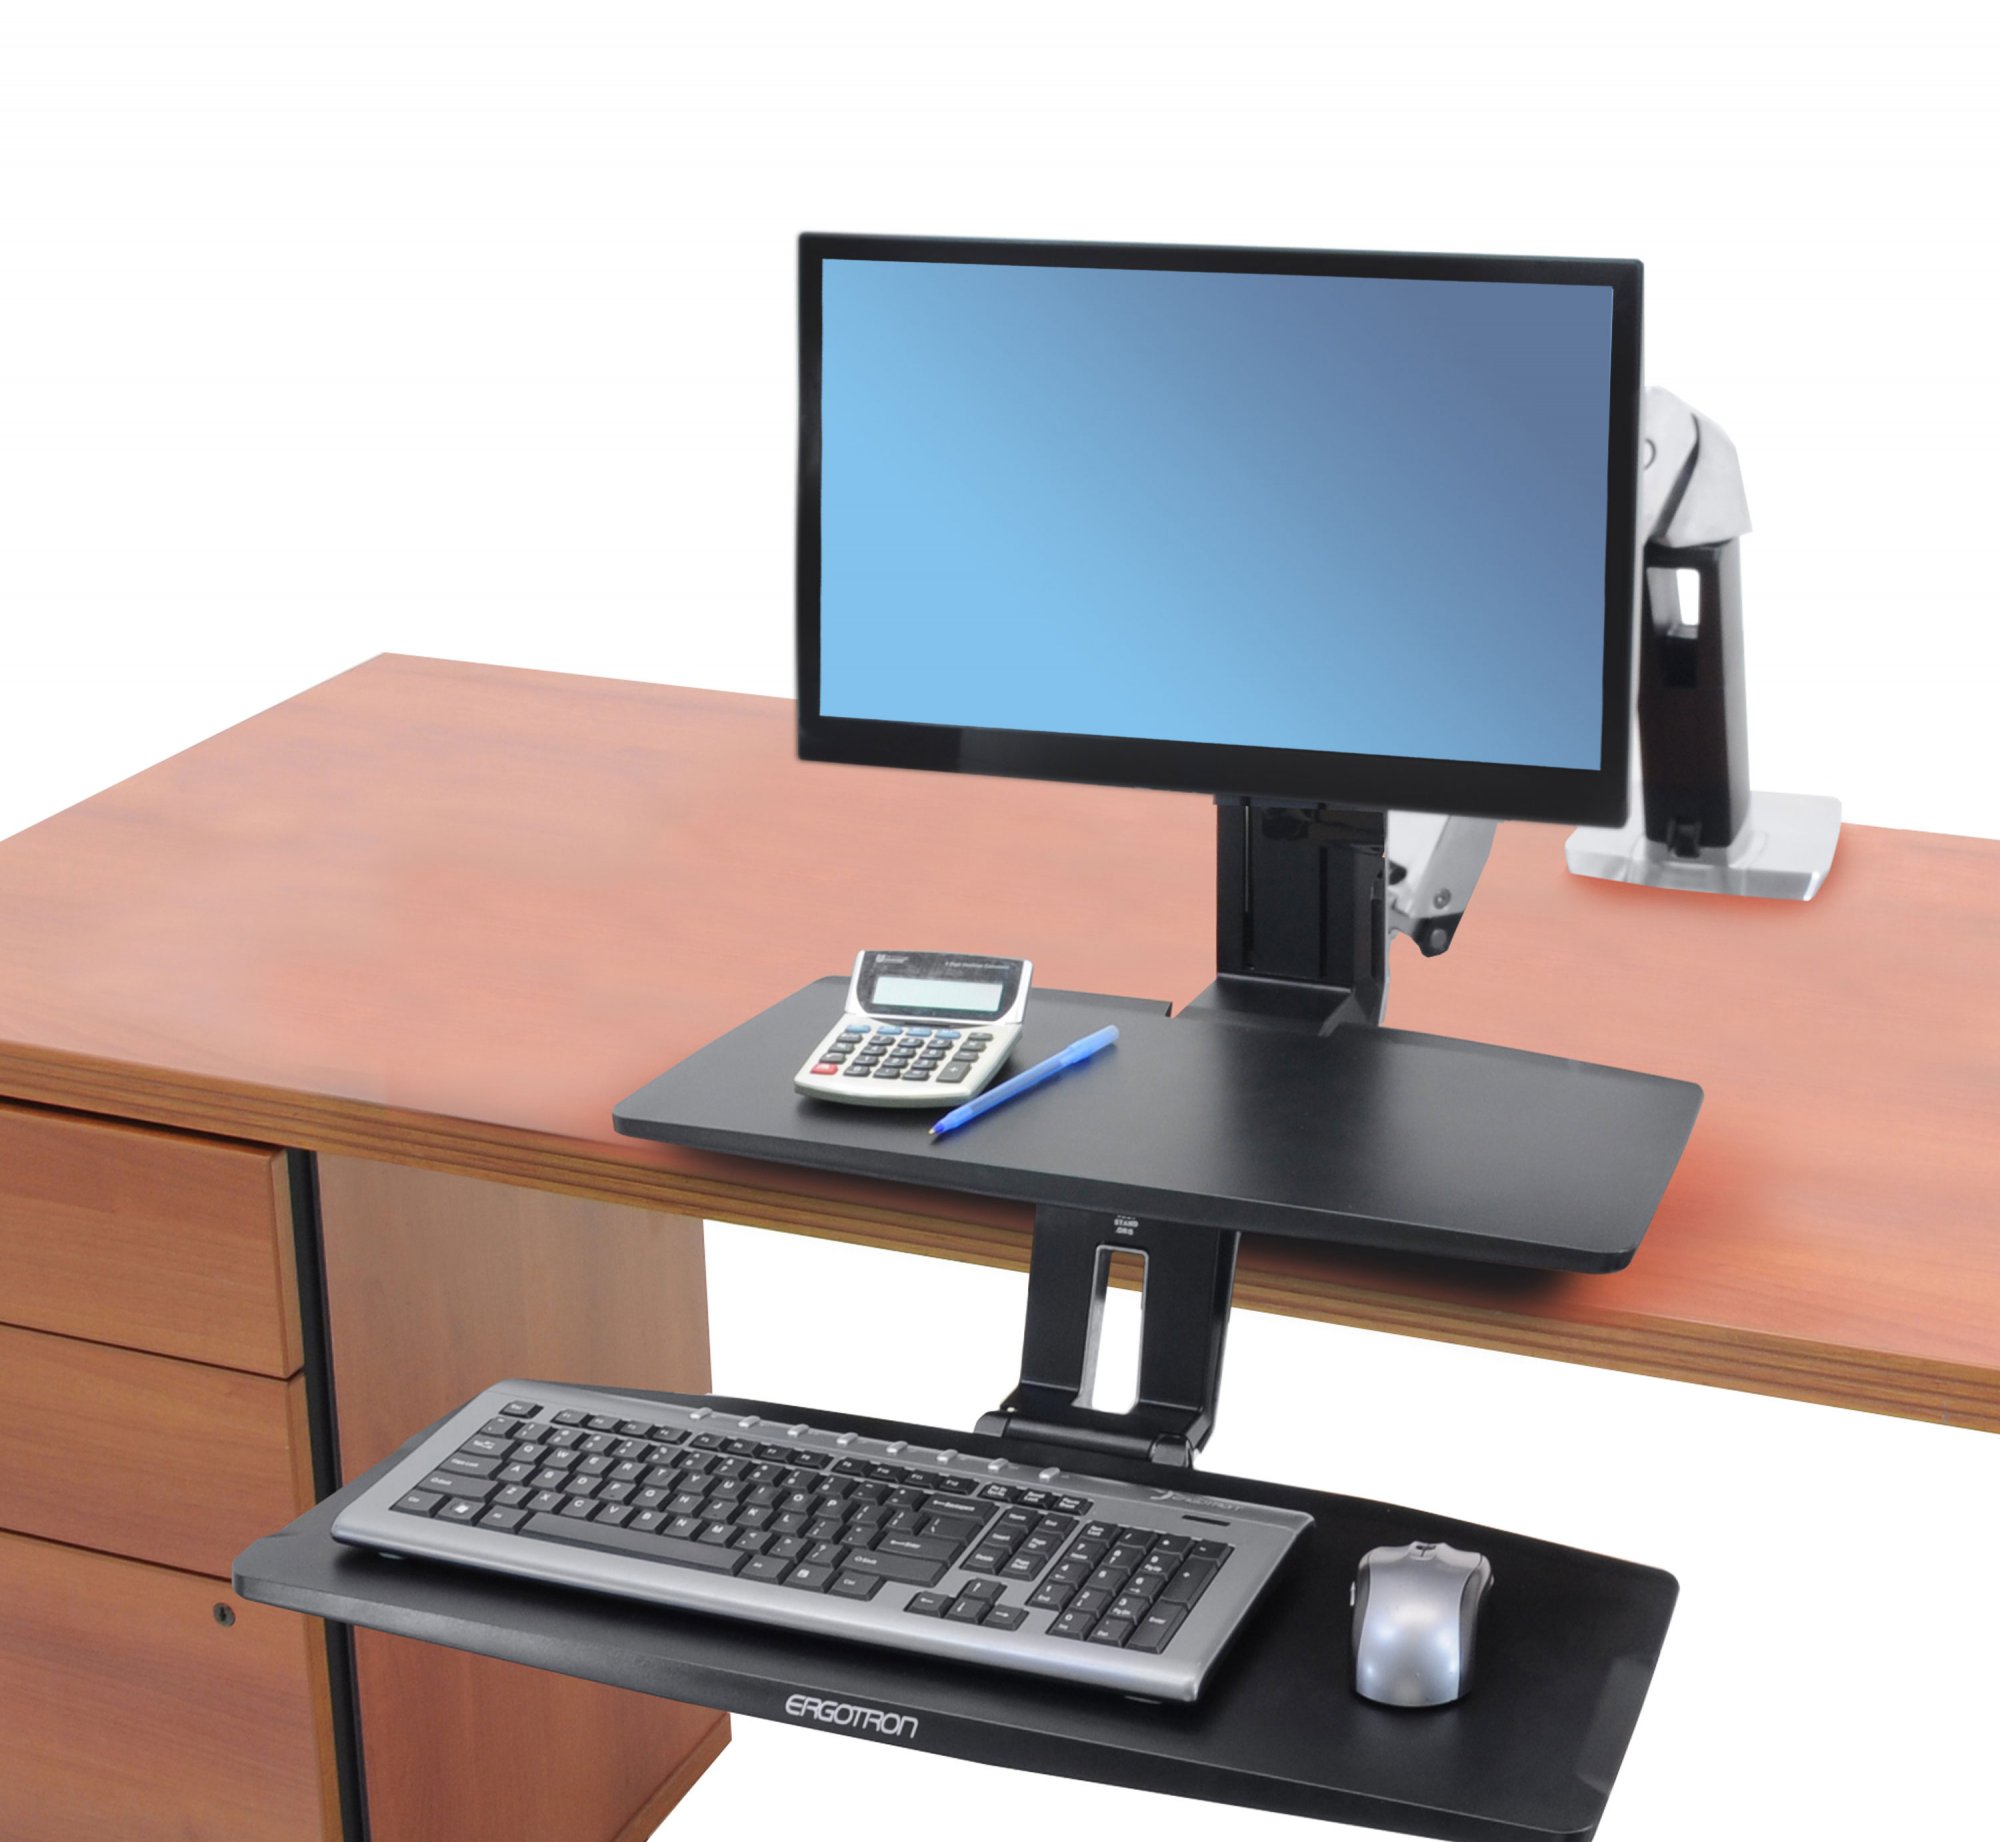 Ergotron 24-390-026 WorkFit-A with Suspended Keyboard, Single LD